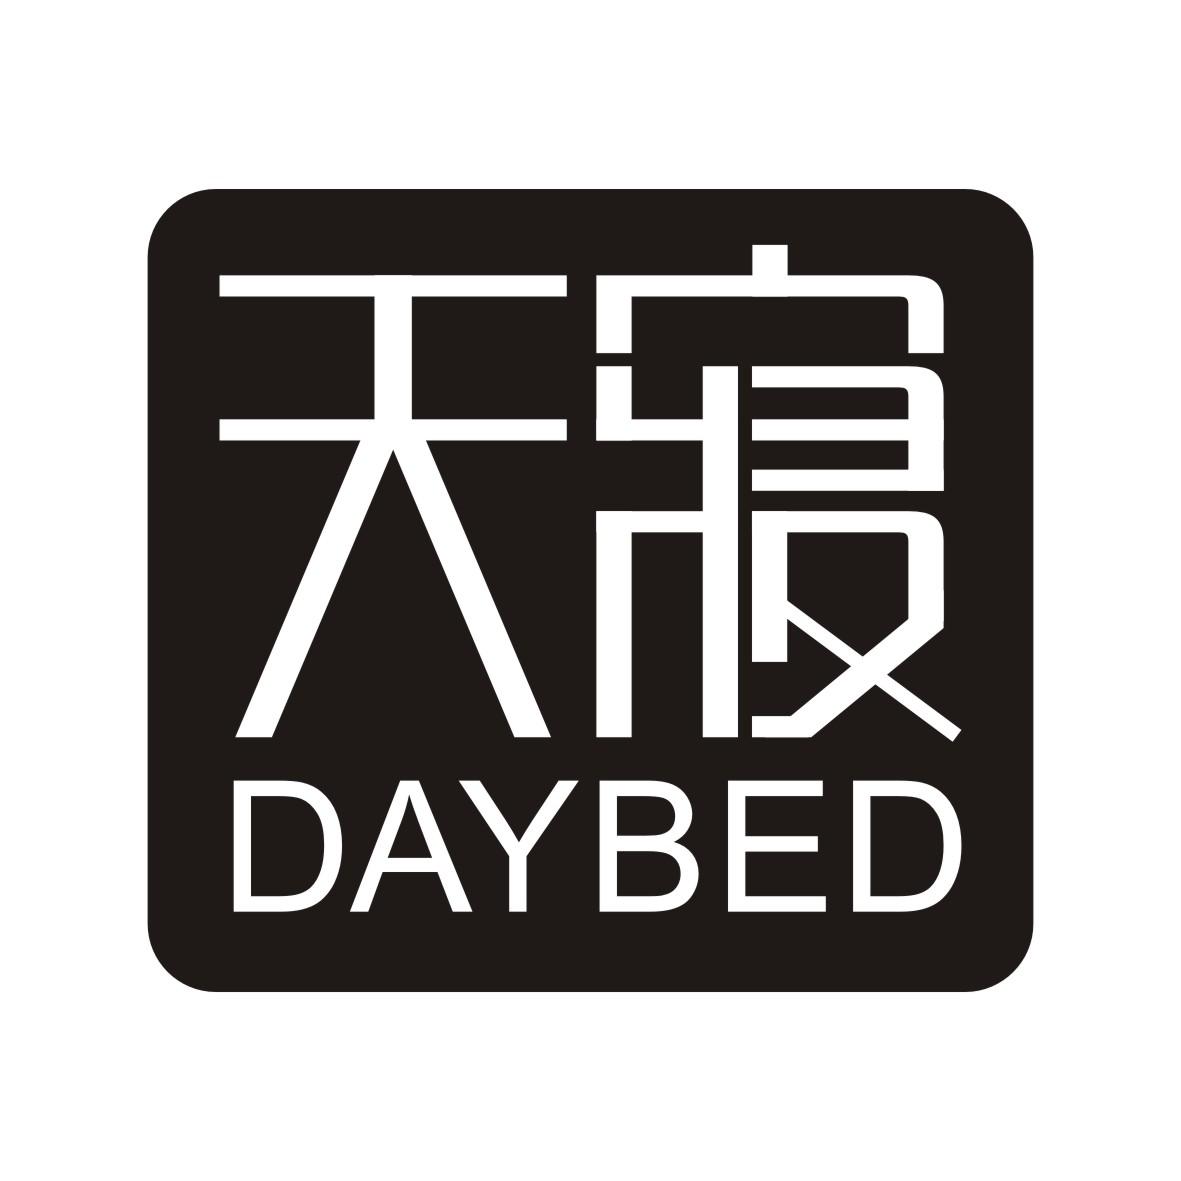   DAYBED